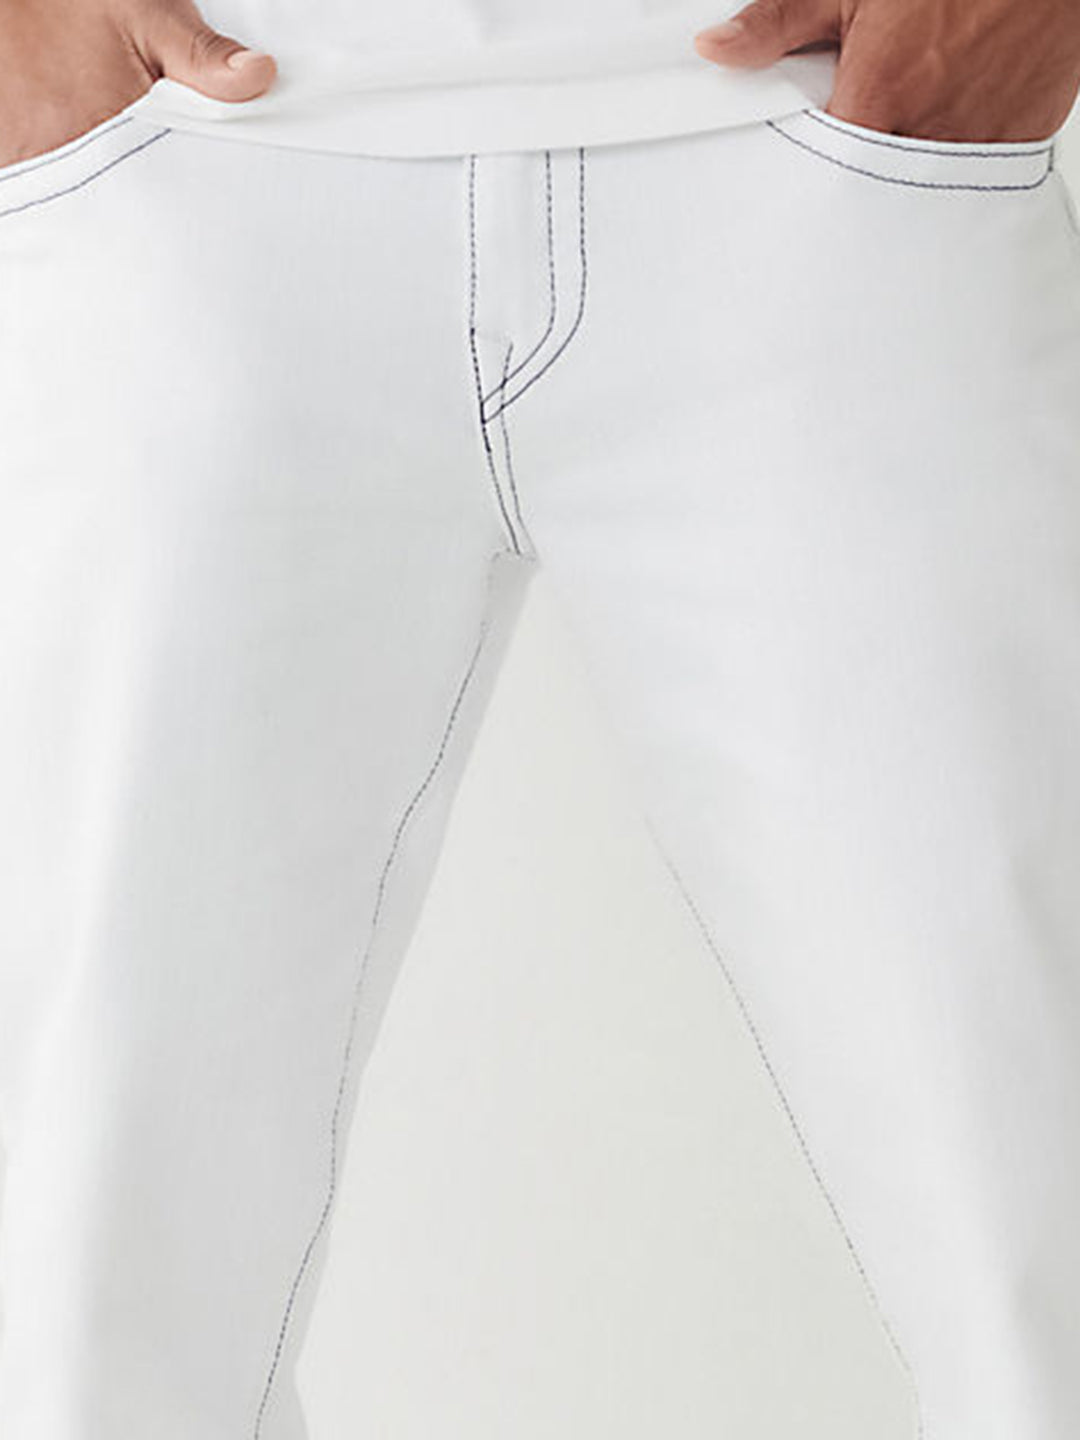 Can guys ever look good wearing white jeans? If so what should guys wear  with them? - Quora